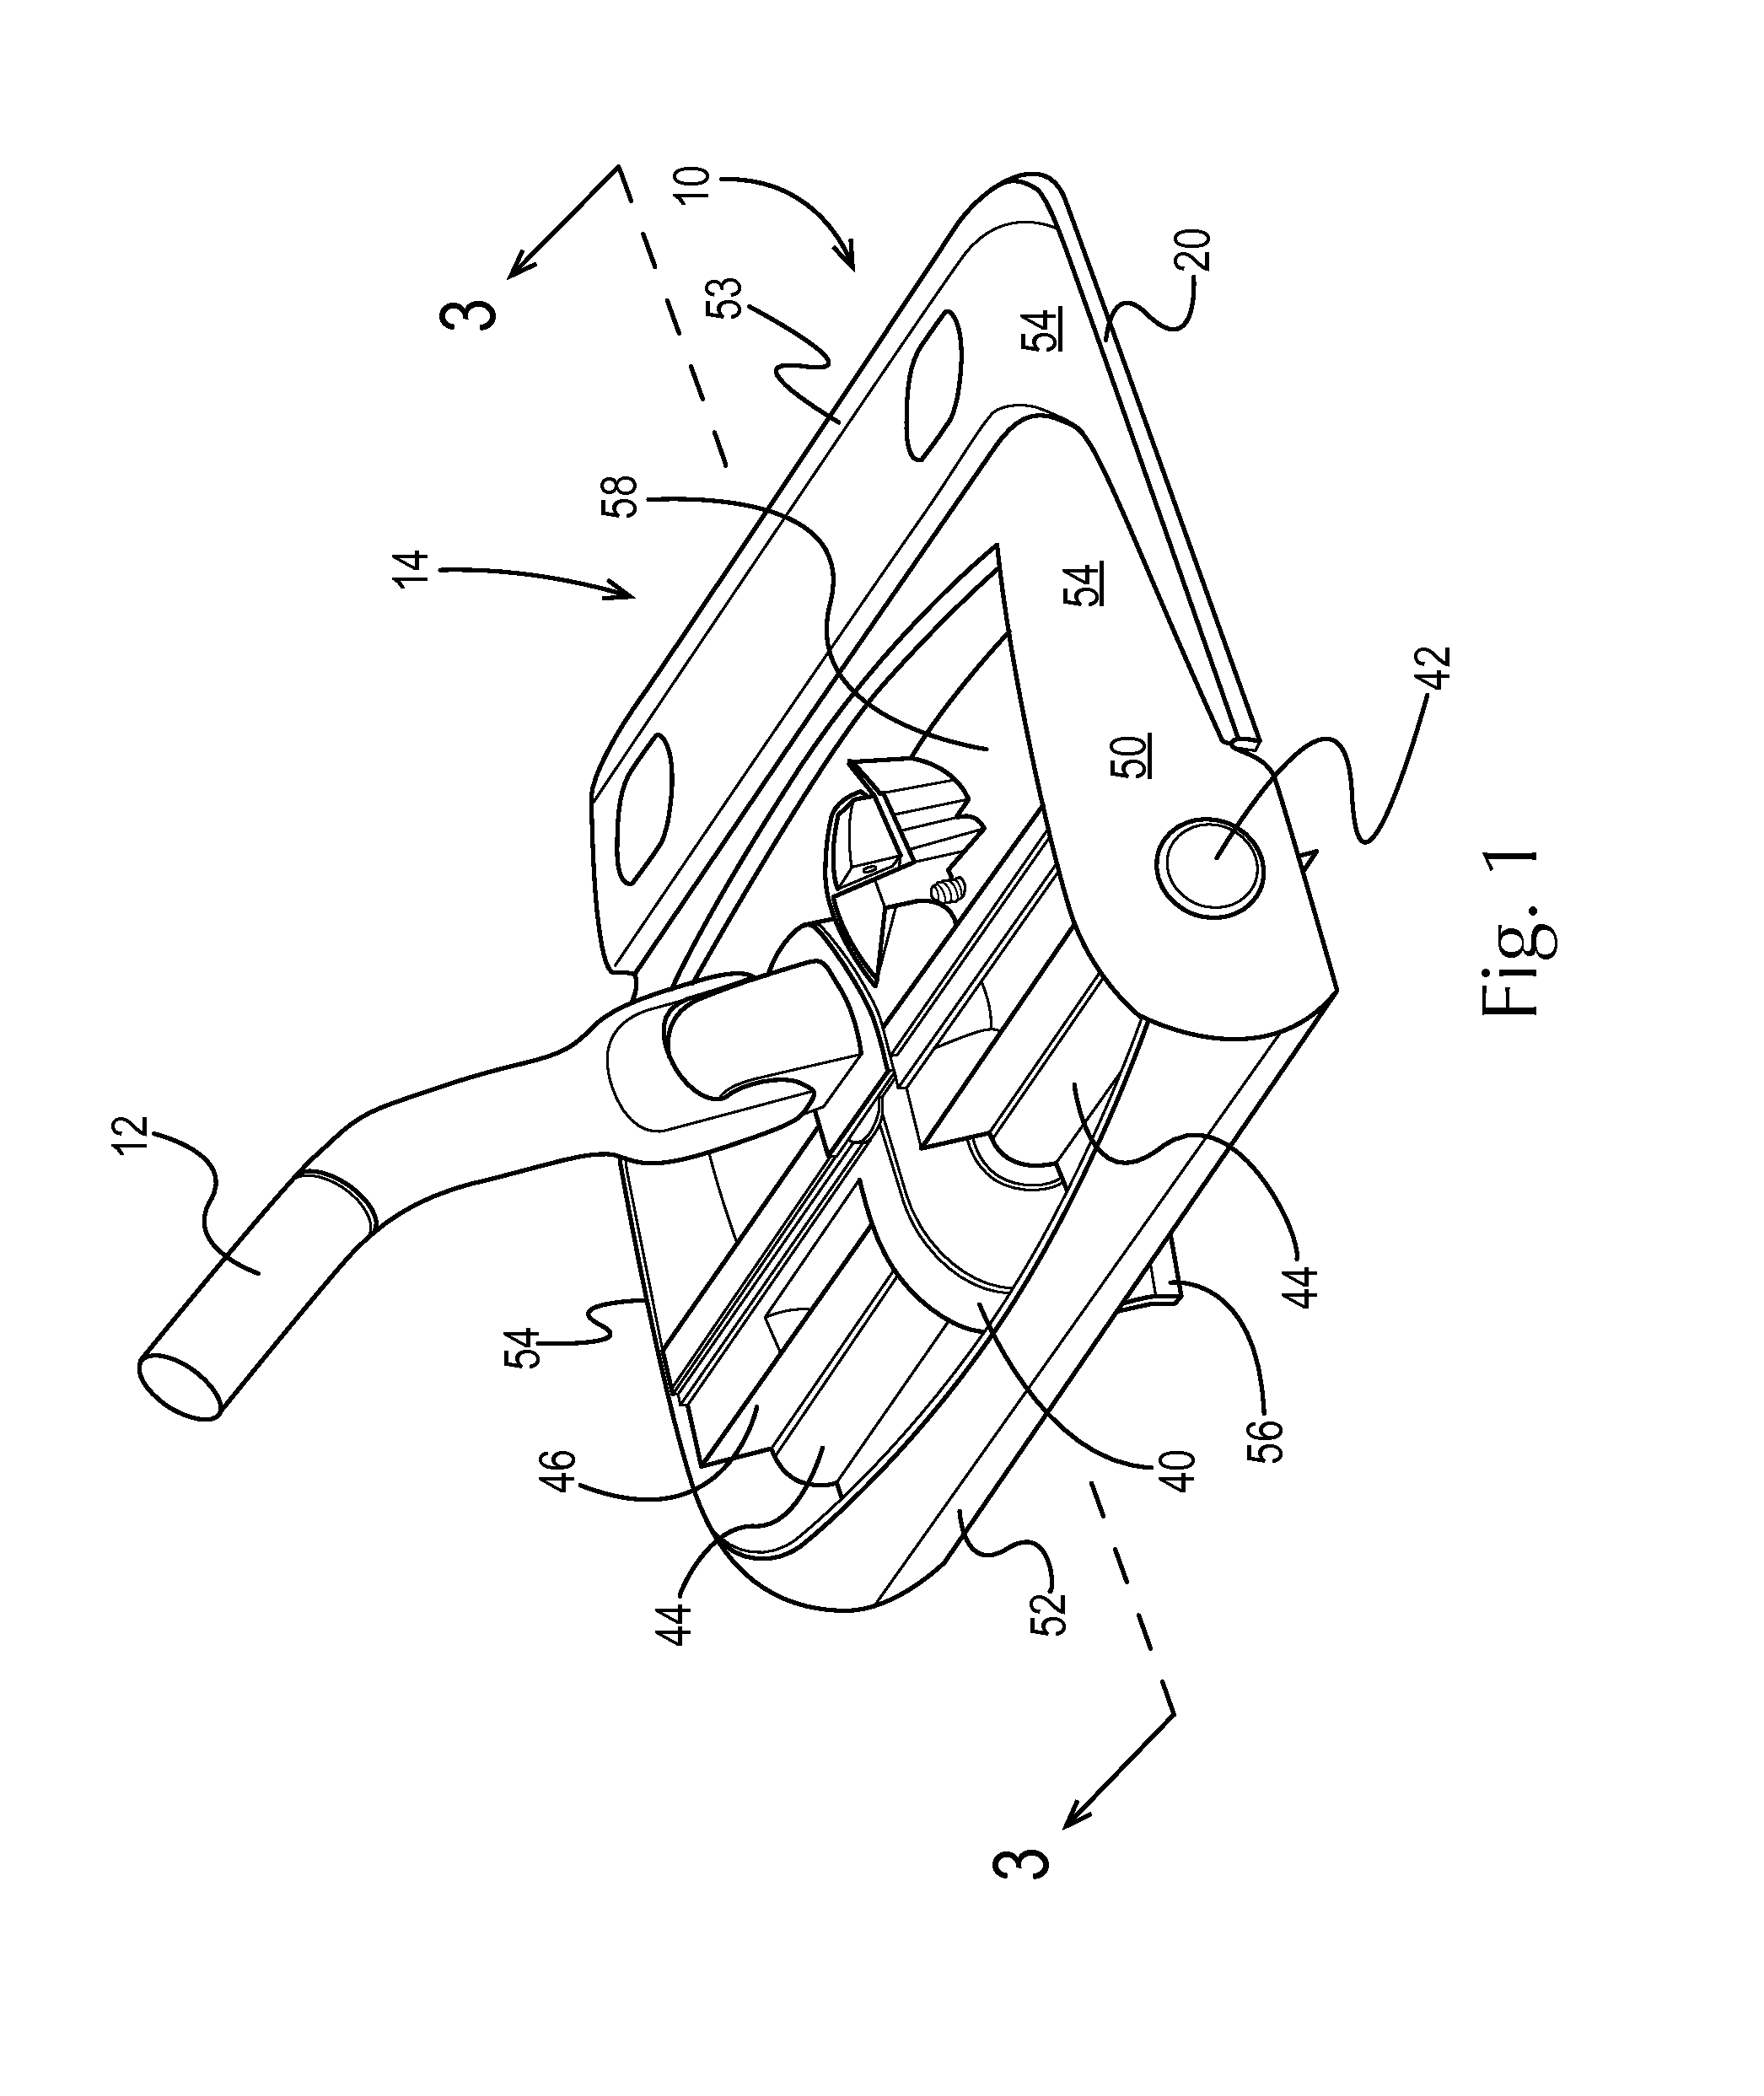 Floor cleaning device having disposable floor sheets and rotatable beater bar and method of cleaning a floor therewith